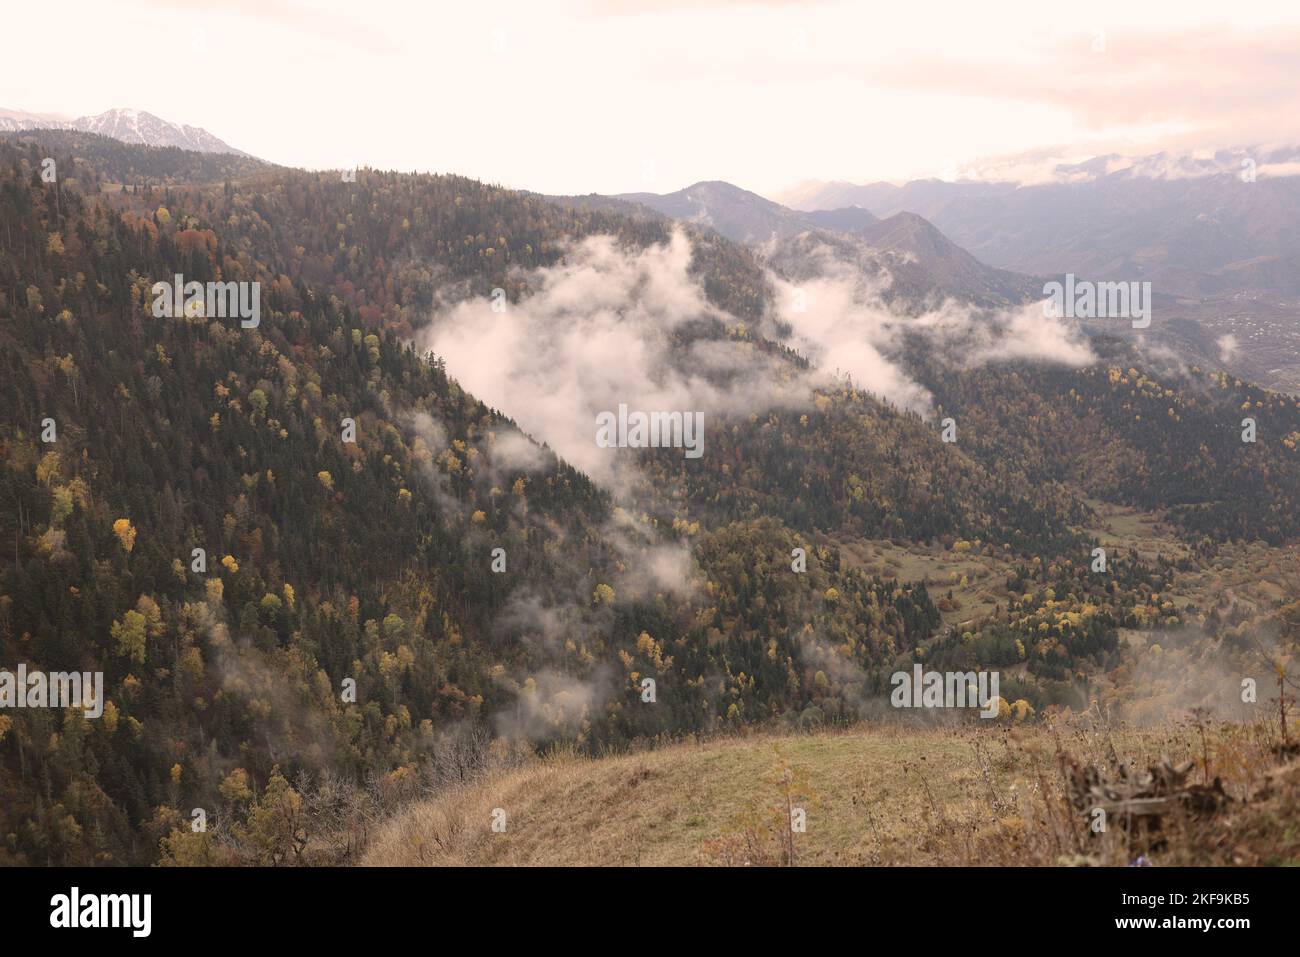 Beautiful landscape with foggy mountains and forest. Stock Photo